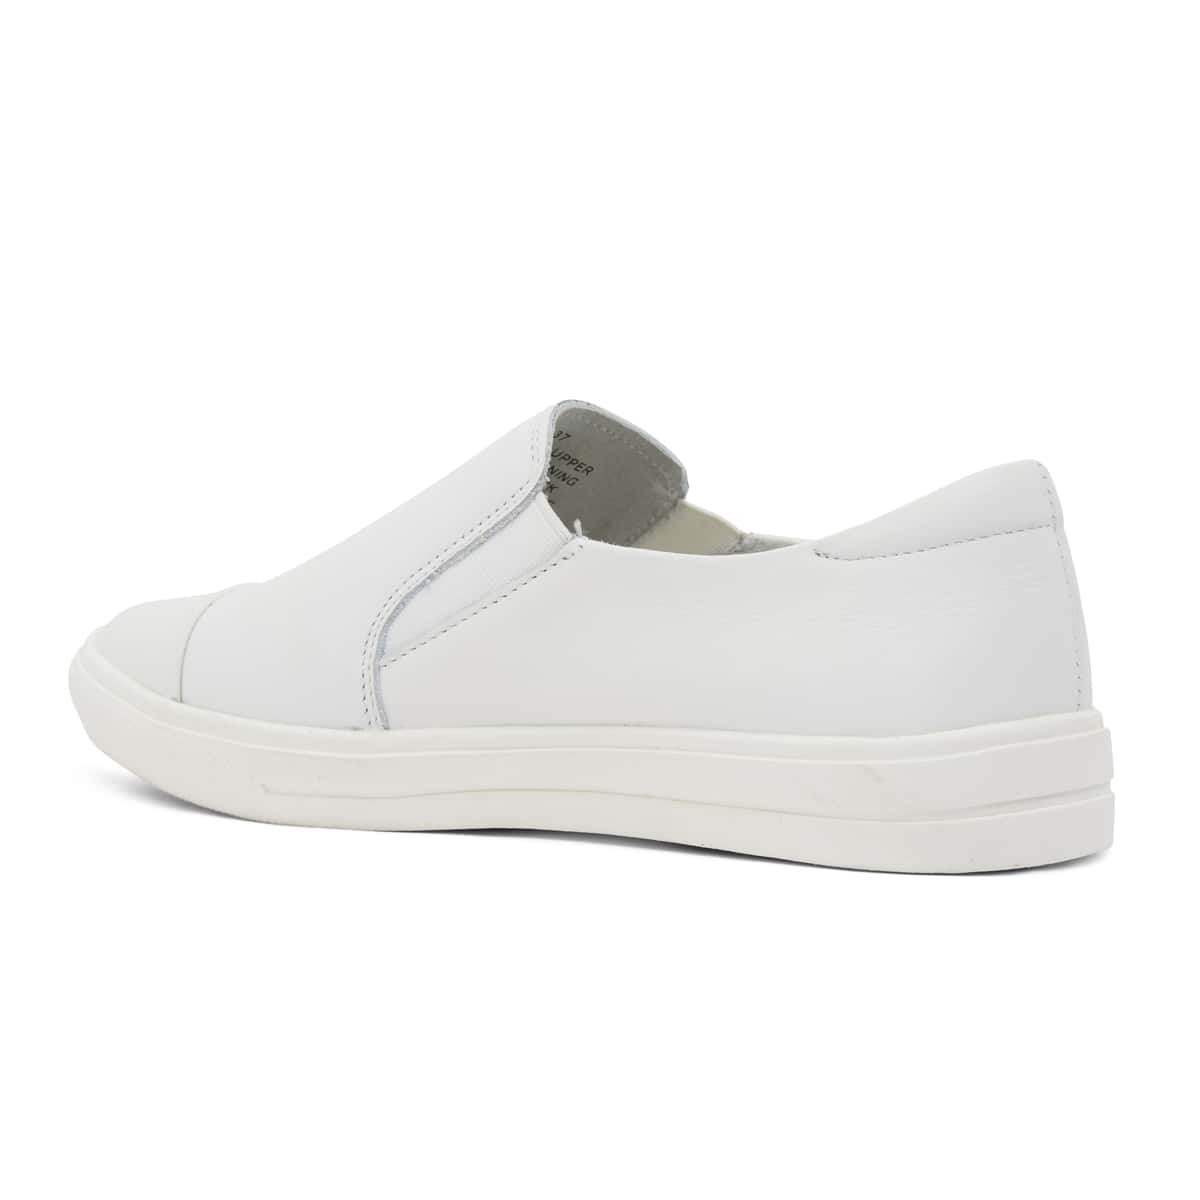 Tandem Sneaker in White Leather